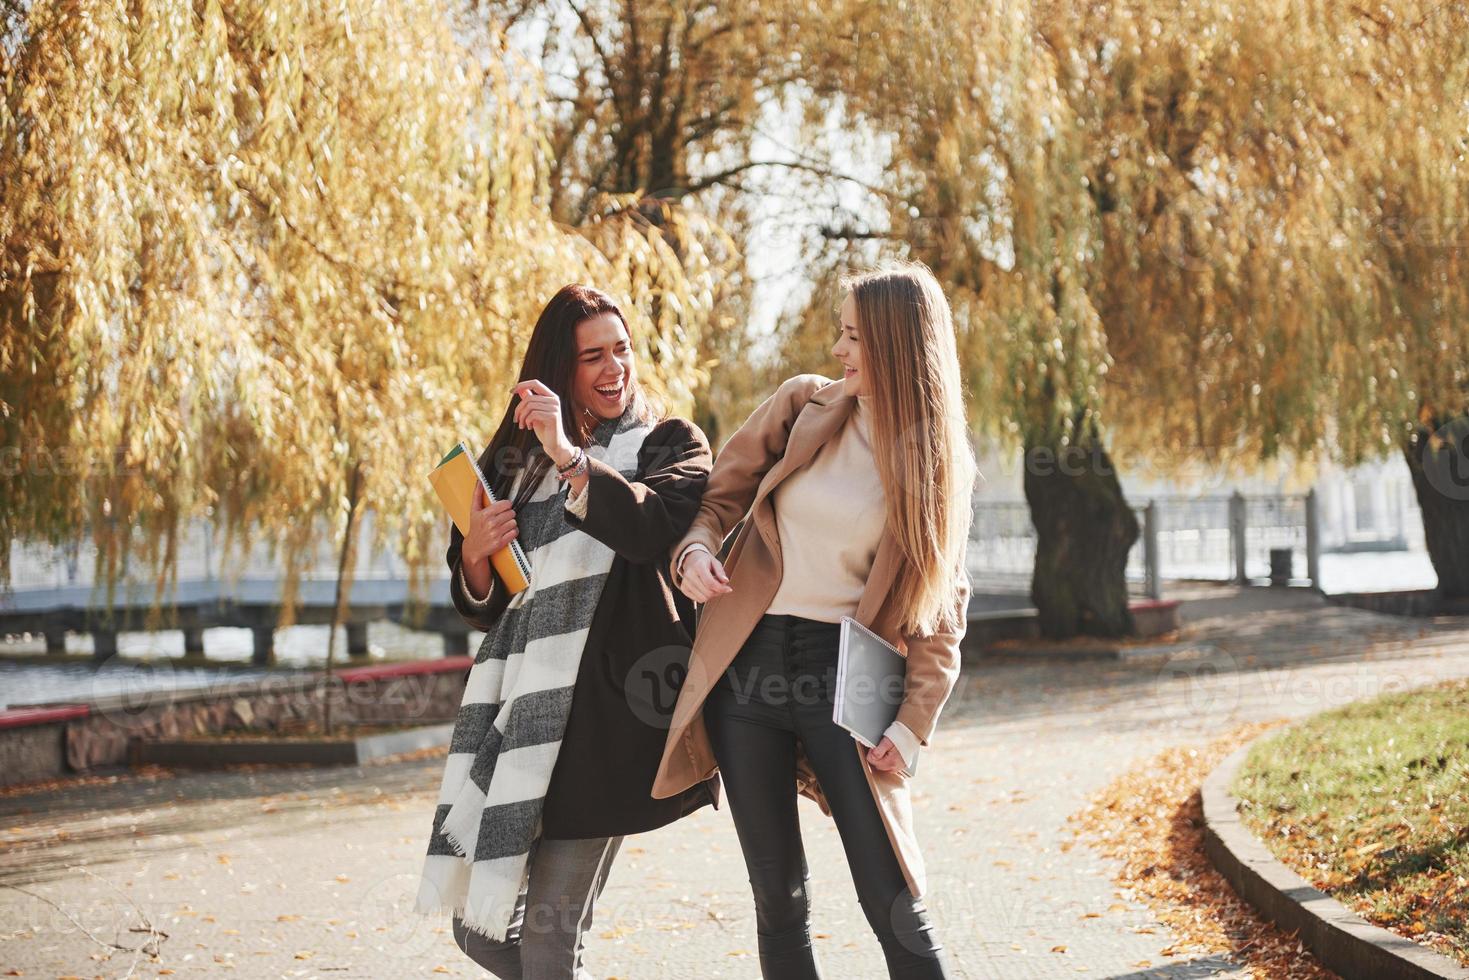 Friendly gesture between these two young and beautiful students in the autumn park photo